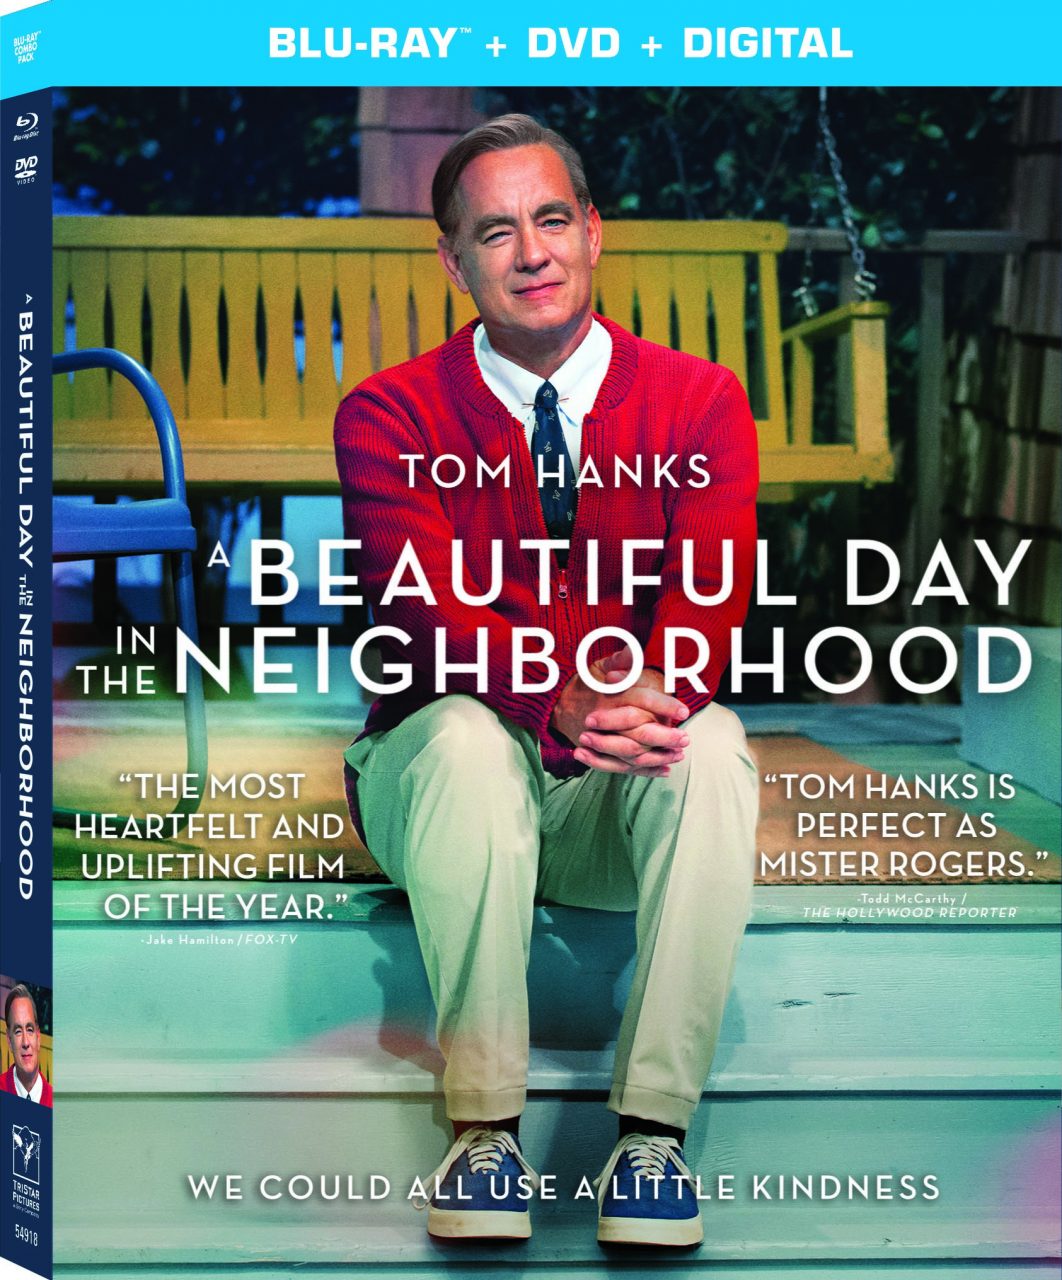 A Beautiful Day In The Neighborhood Blu-Ray Combo Pack cover (Sony Pictures Home Entertainment)